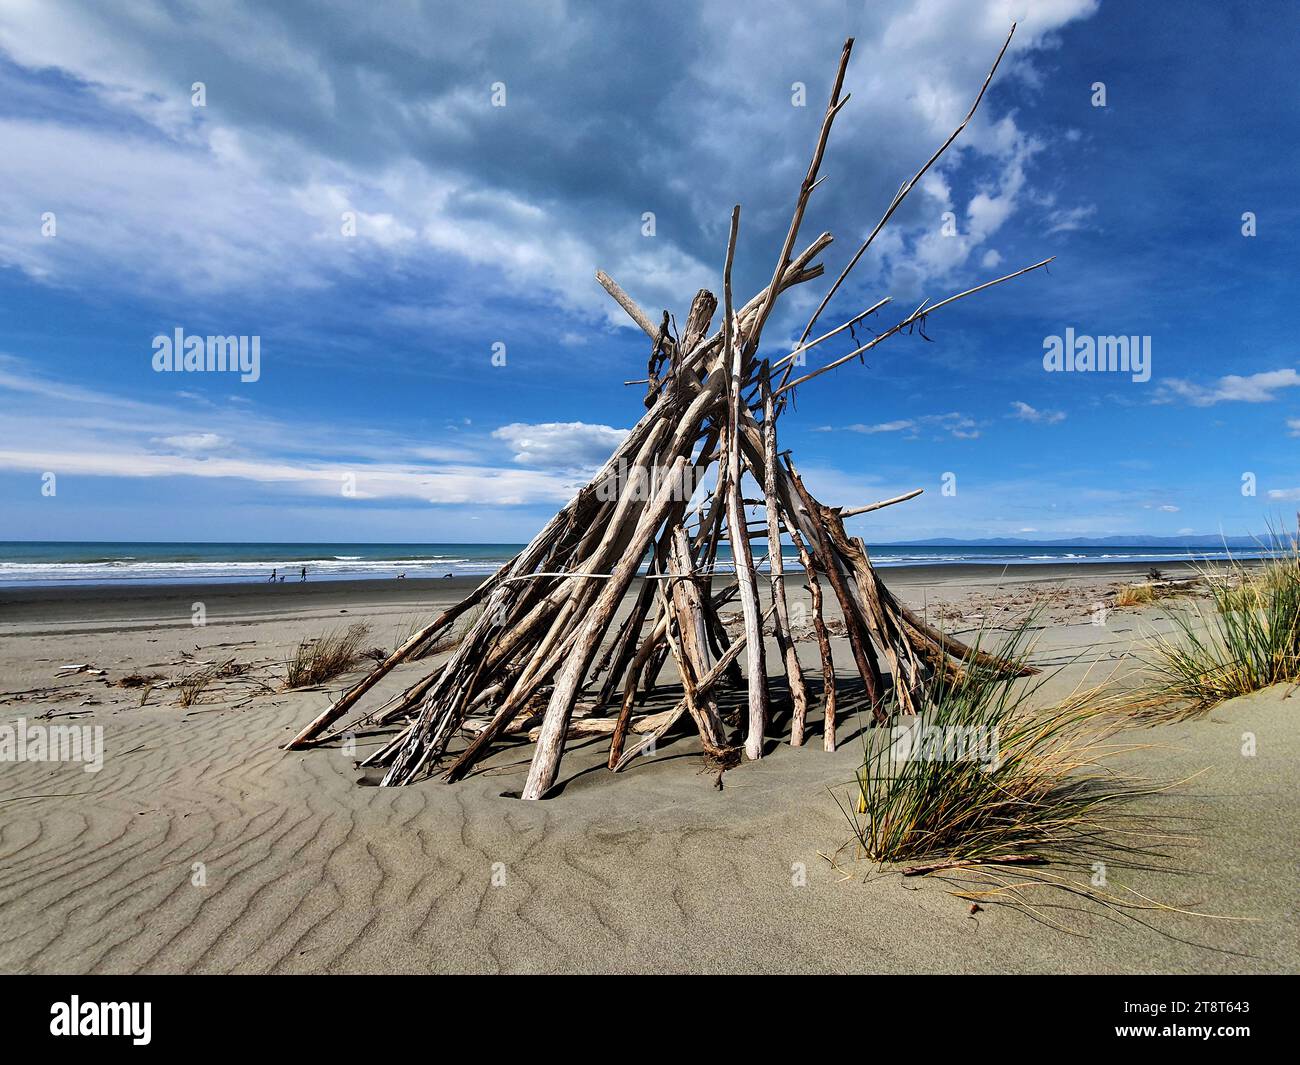 Grand designs Pegasus bay, Driftwood is wood that has been washed onto a shore or beach of a sea, lake, or river by the action of winds, tides or waves Stock Photo